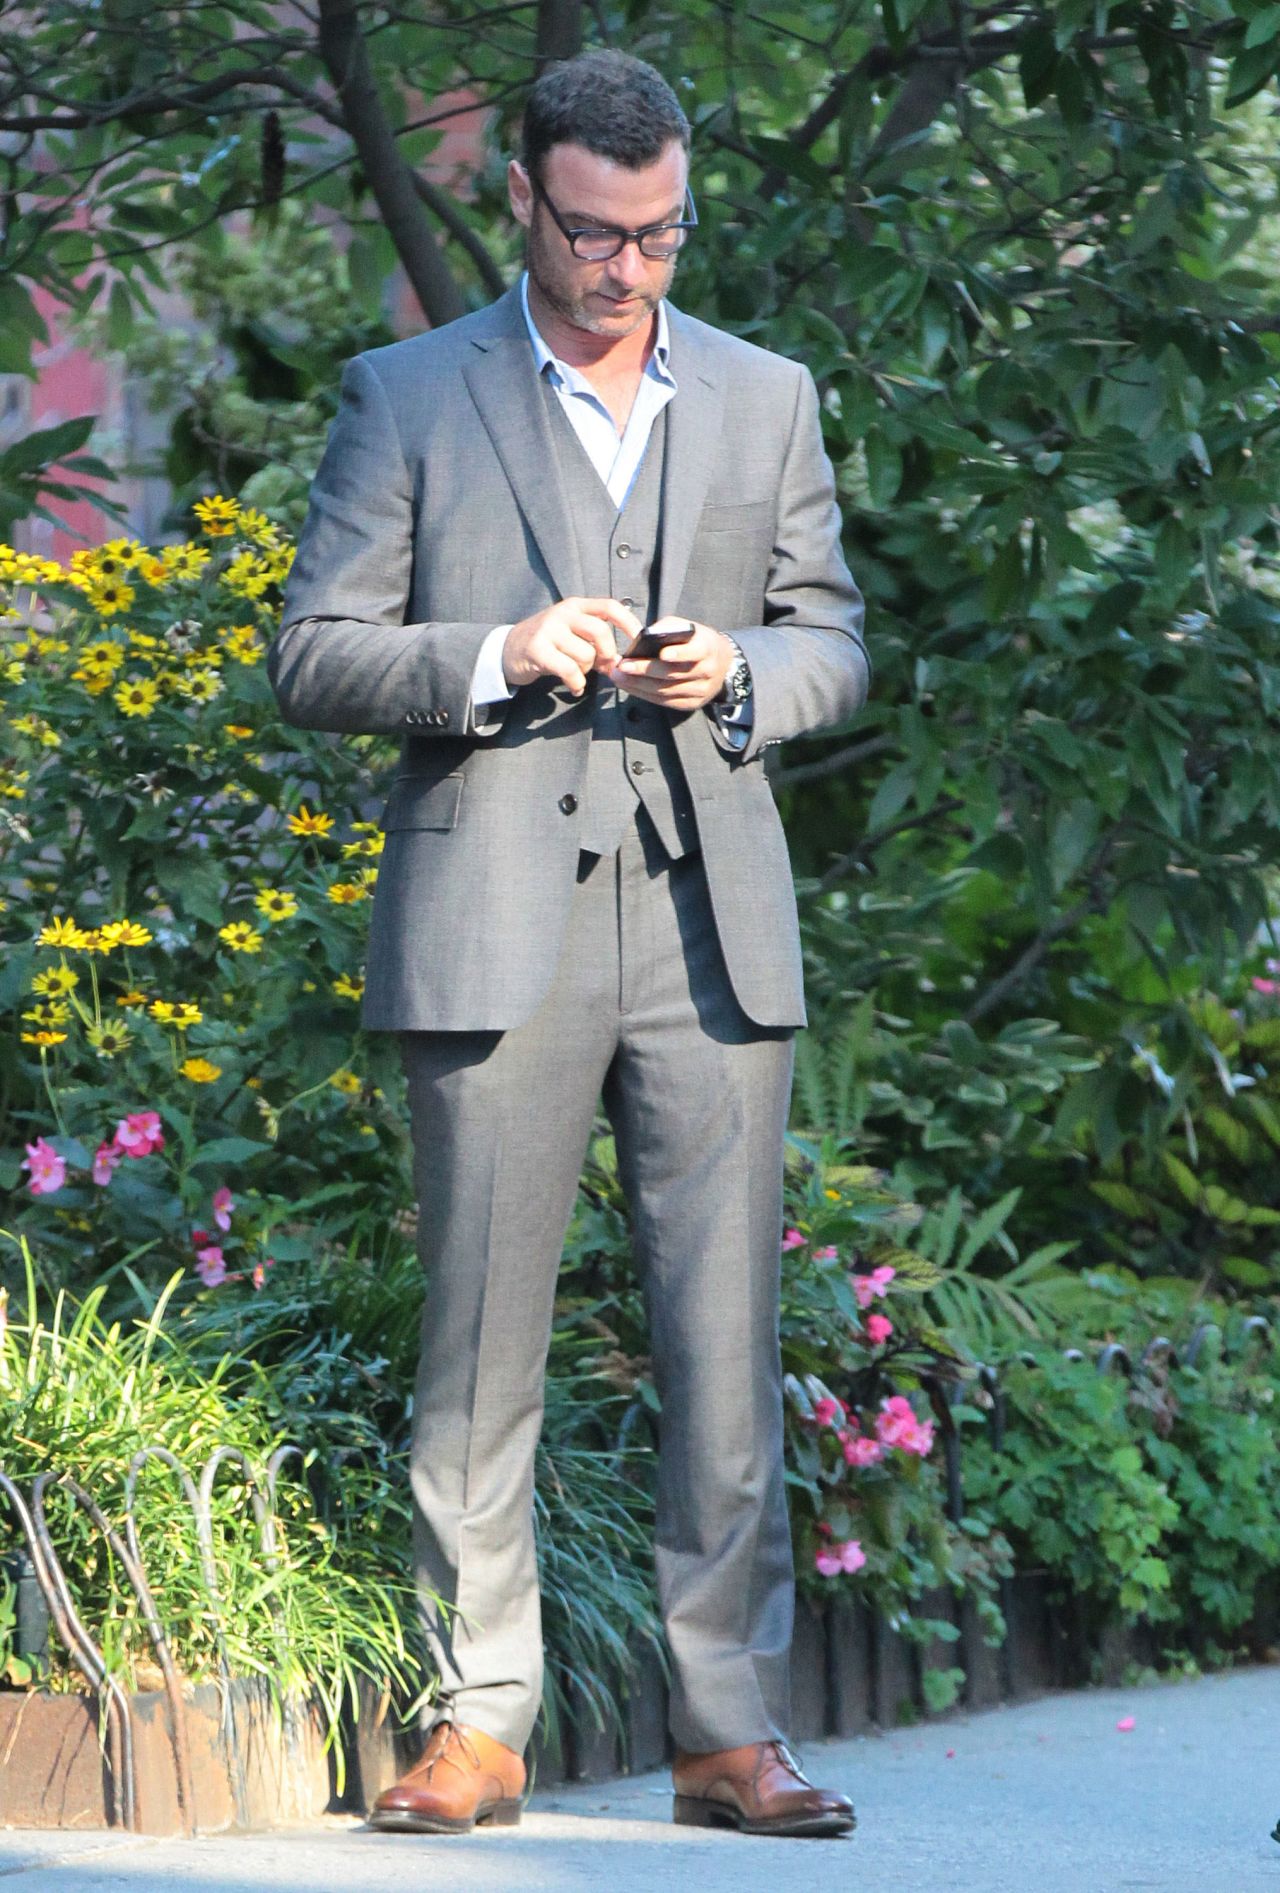 Liev Schreiber does the quick message check while in New York on September 23. 